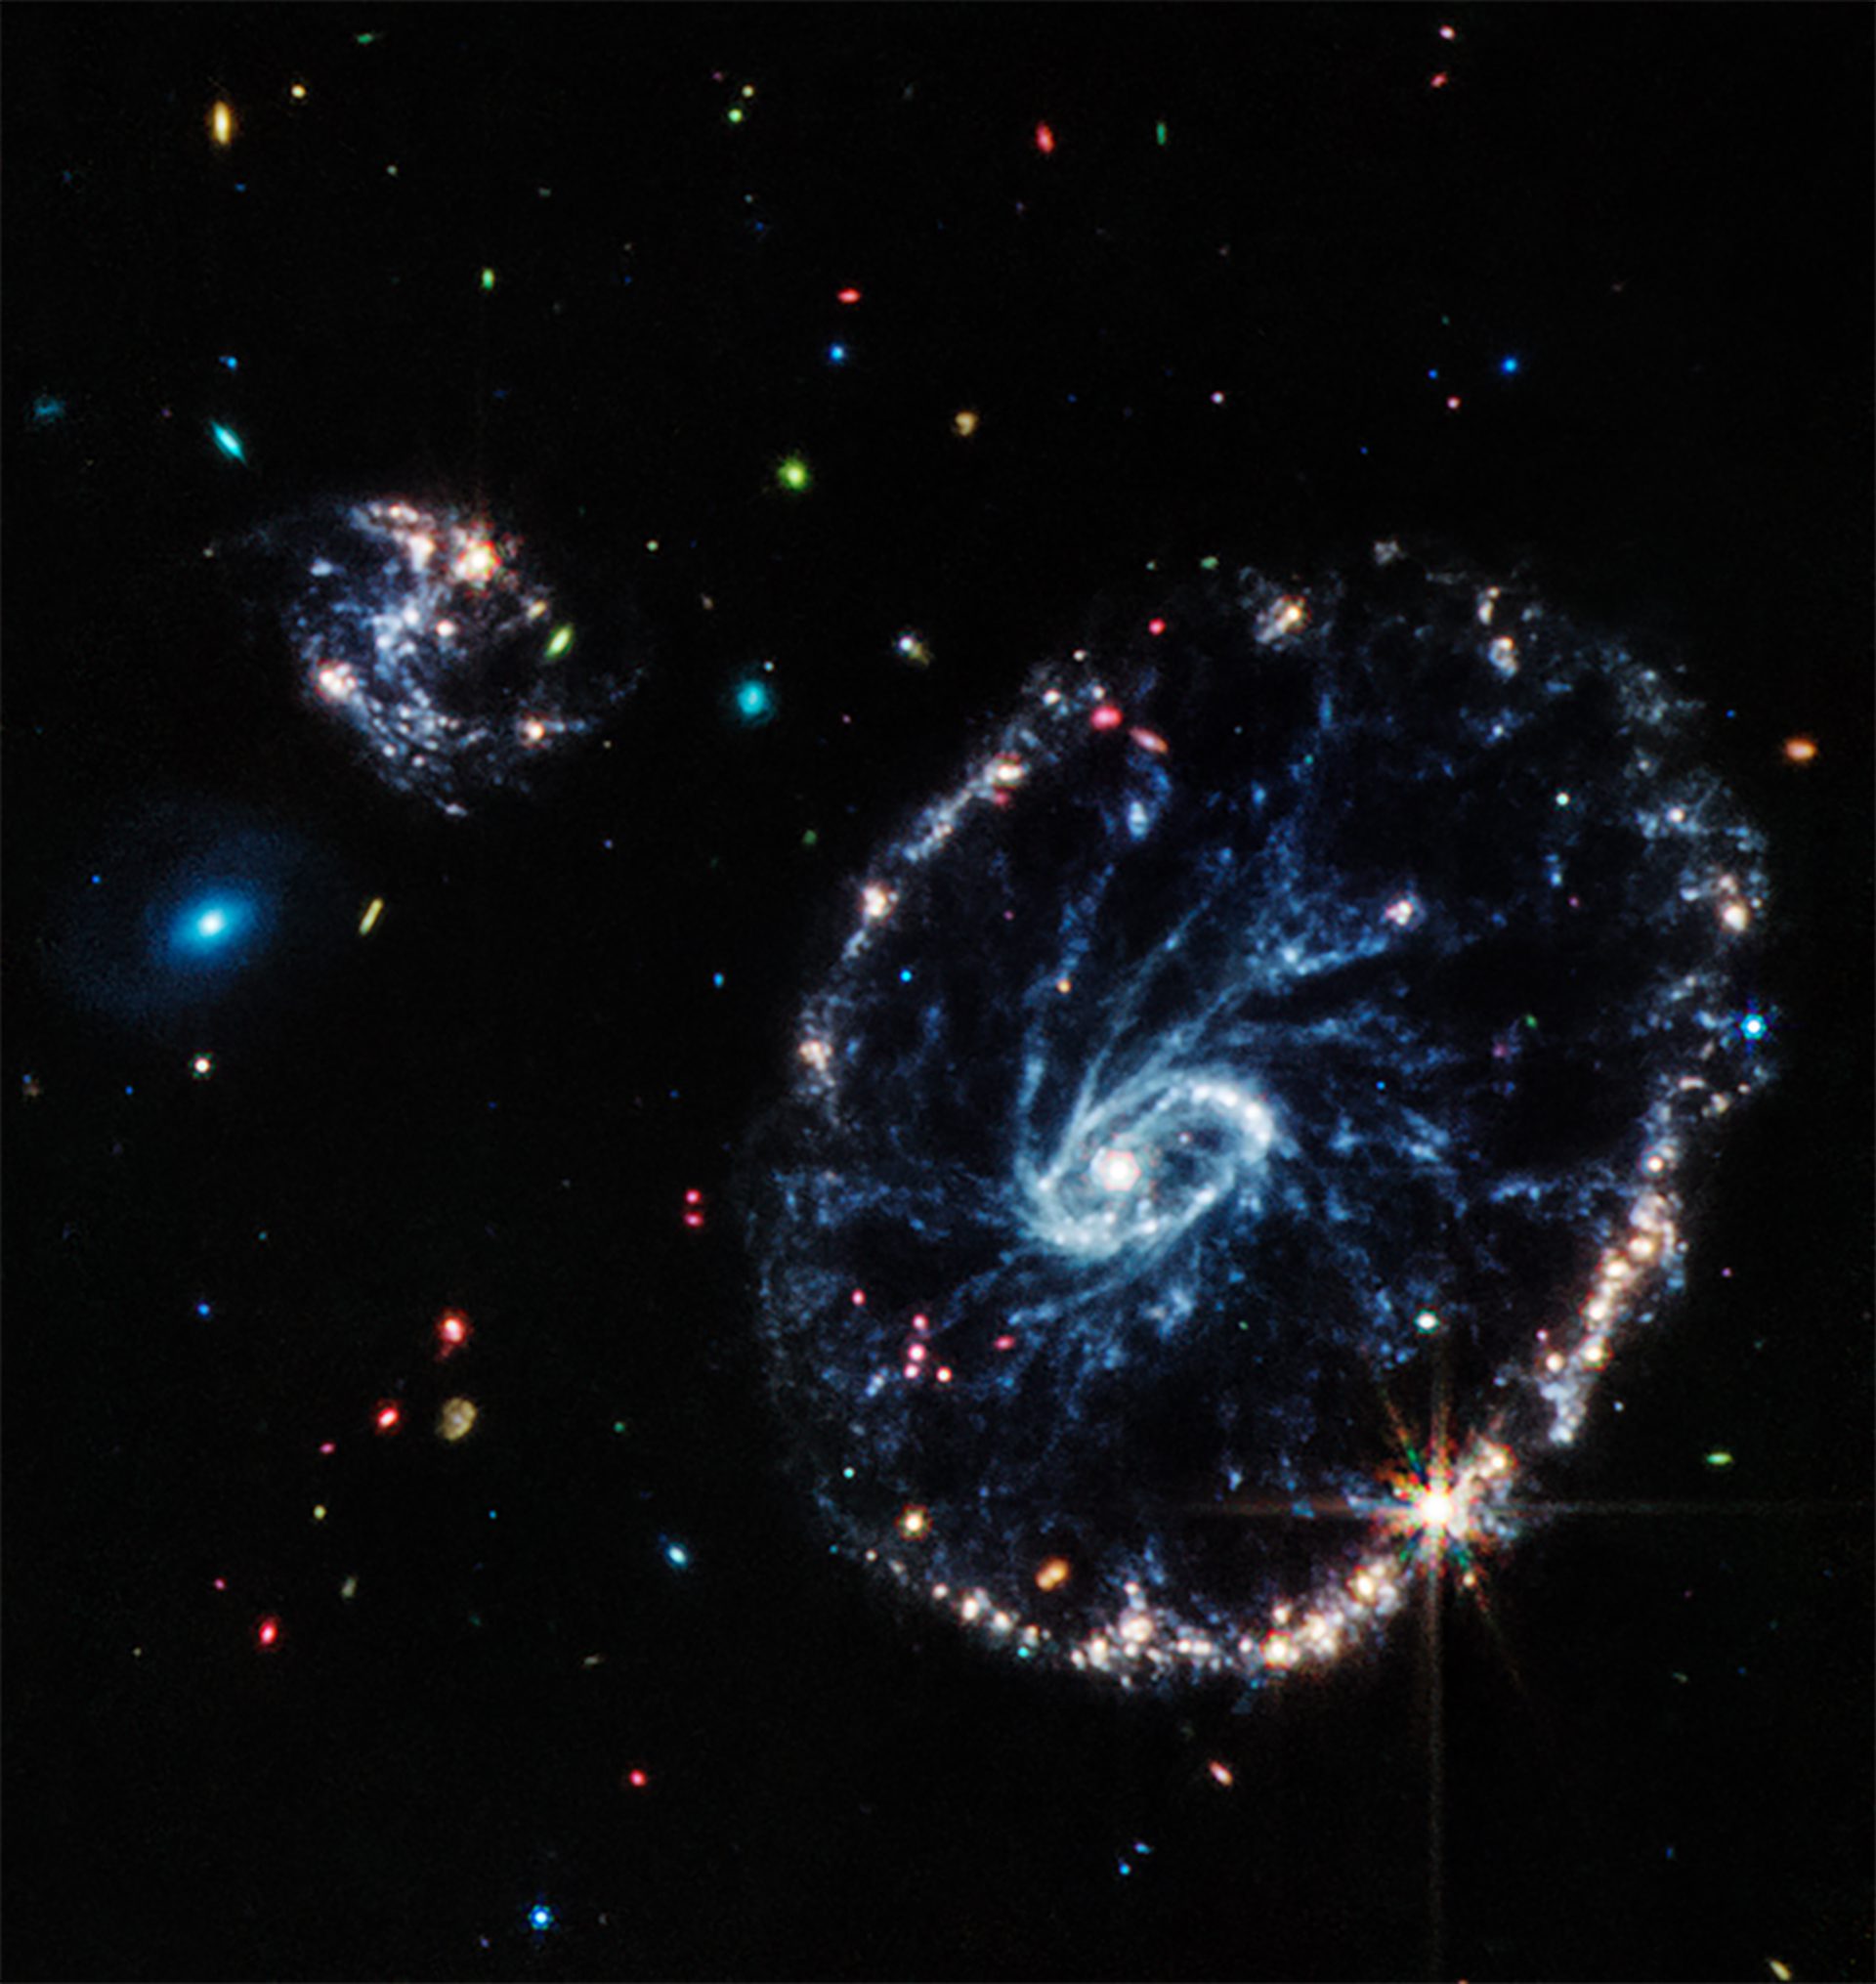 "This image from the Web's Mid-Infrared Instrument (MIRI) instrument shows a group of galaxies, including a large, distorted, ring-shaped galaxy known as the Cartwheel."The experts said in the statement (NASA, ESA, CSA, STScI, Webb ERO Production team)